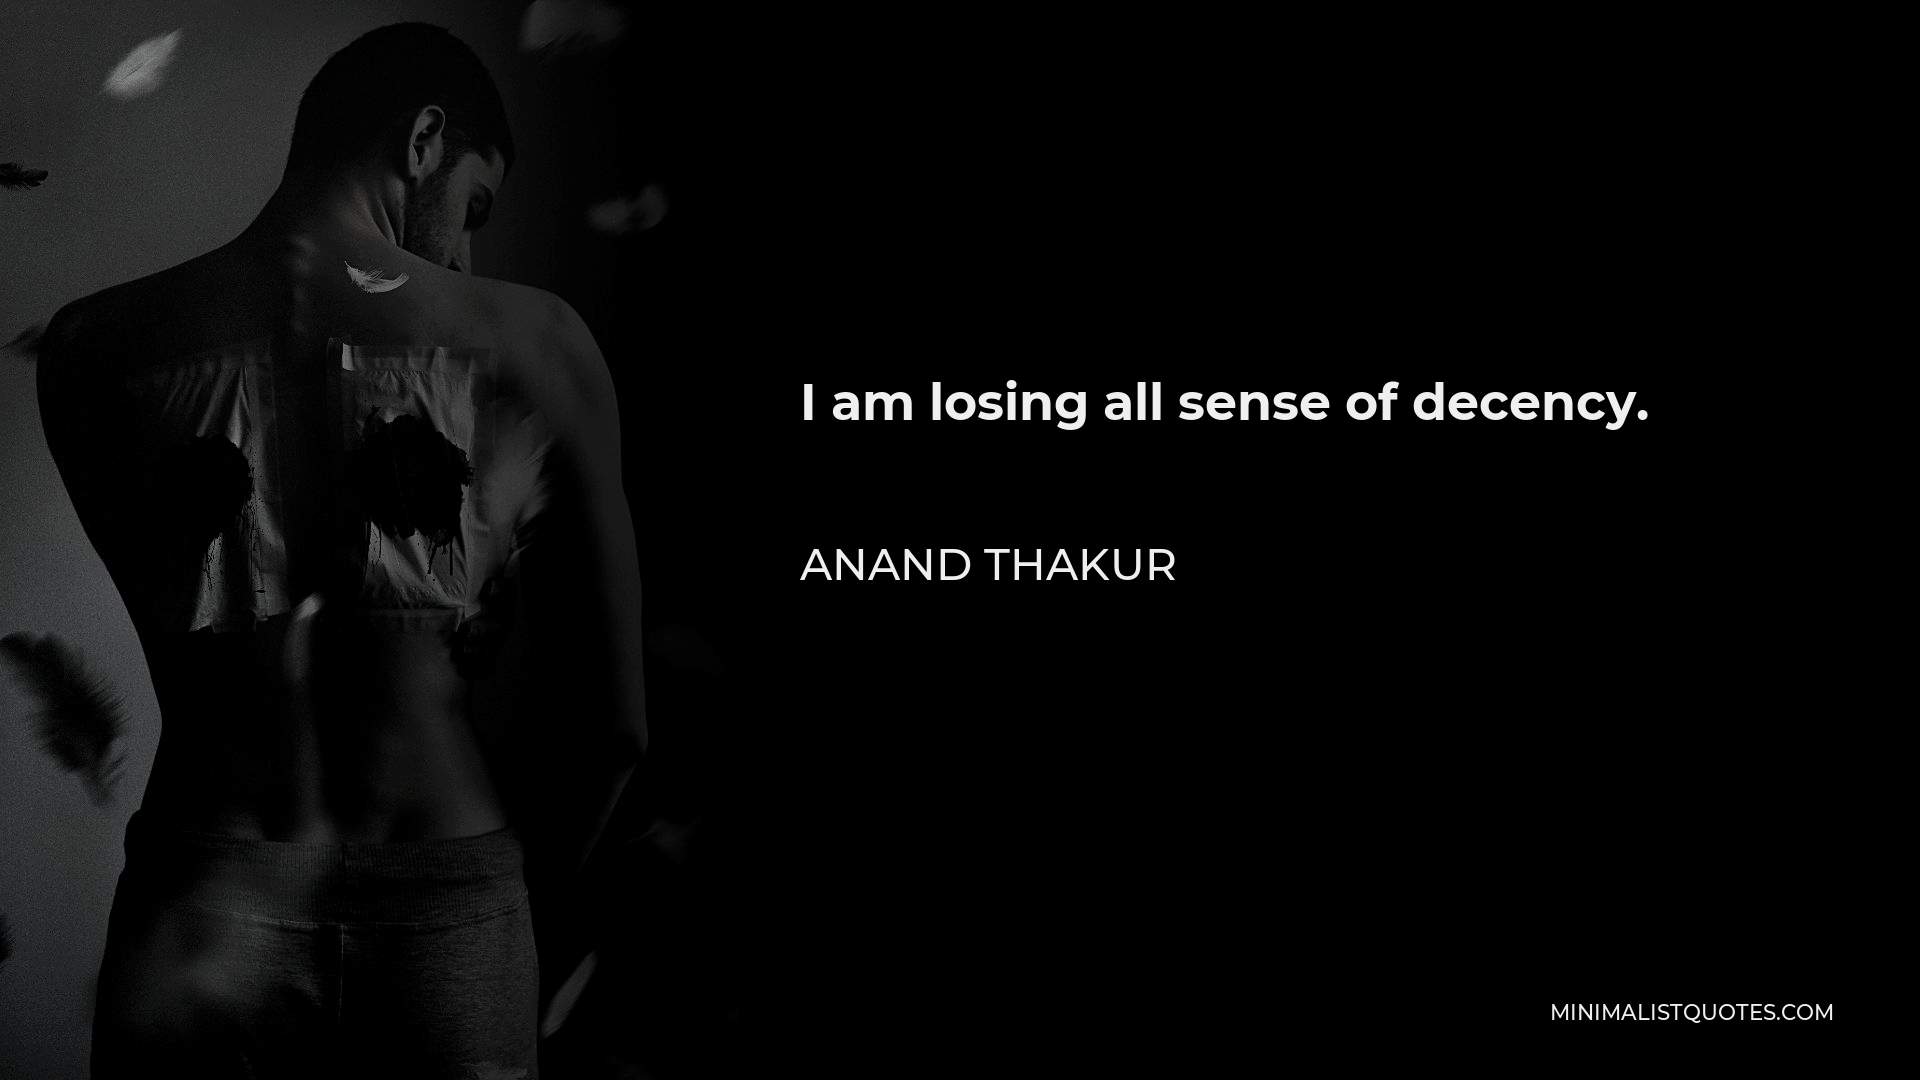 Anand Thakur Quote - I am losing all sense of decency.